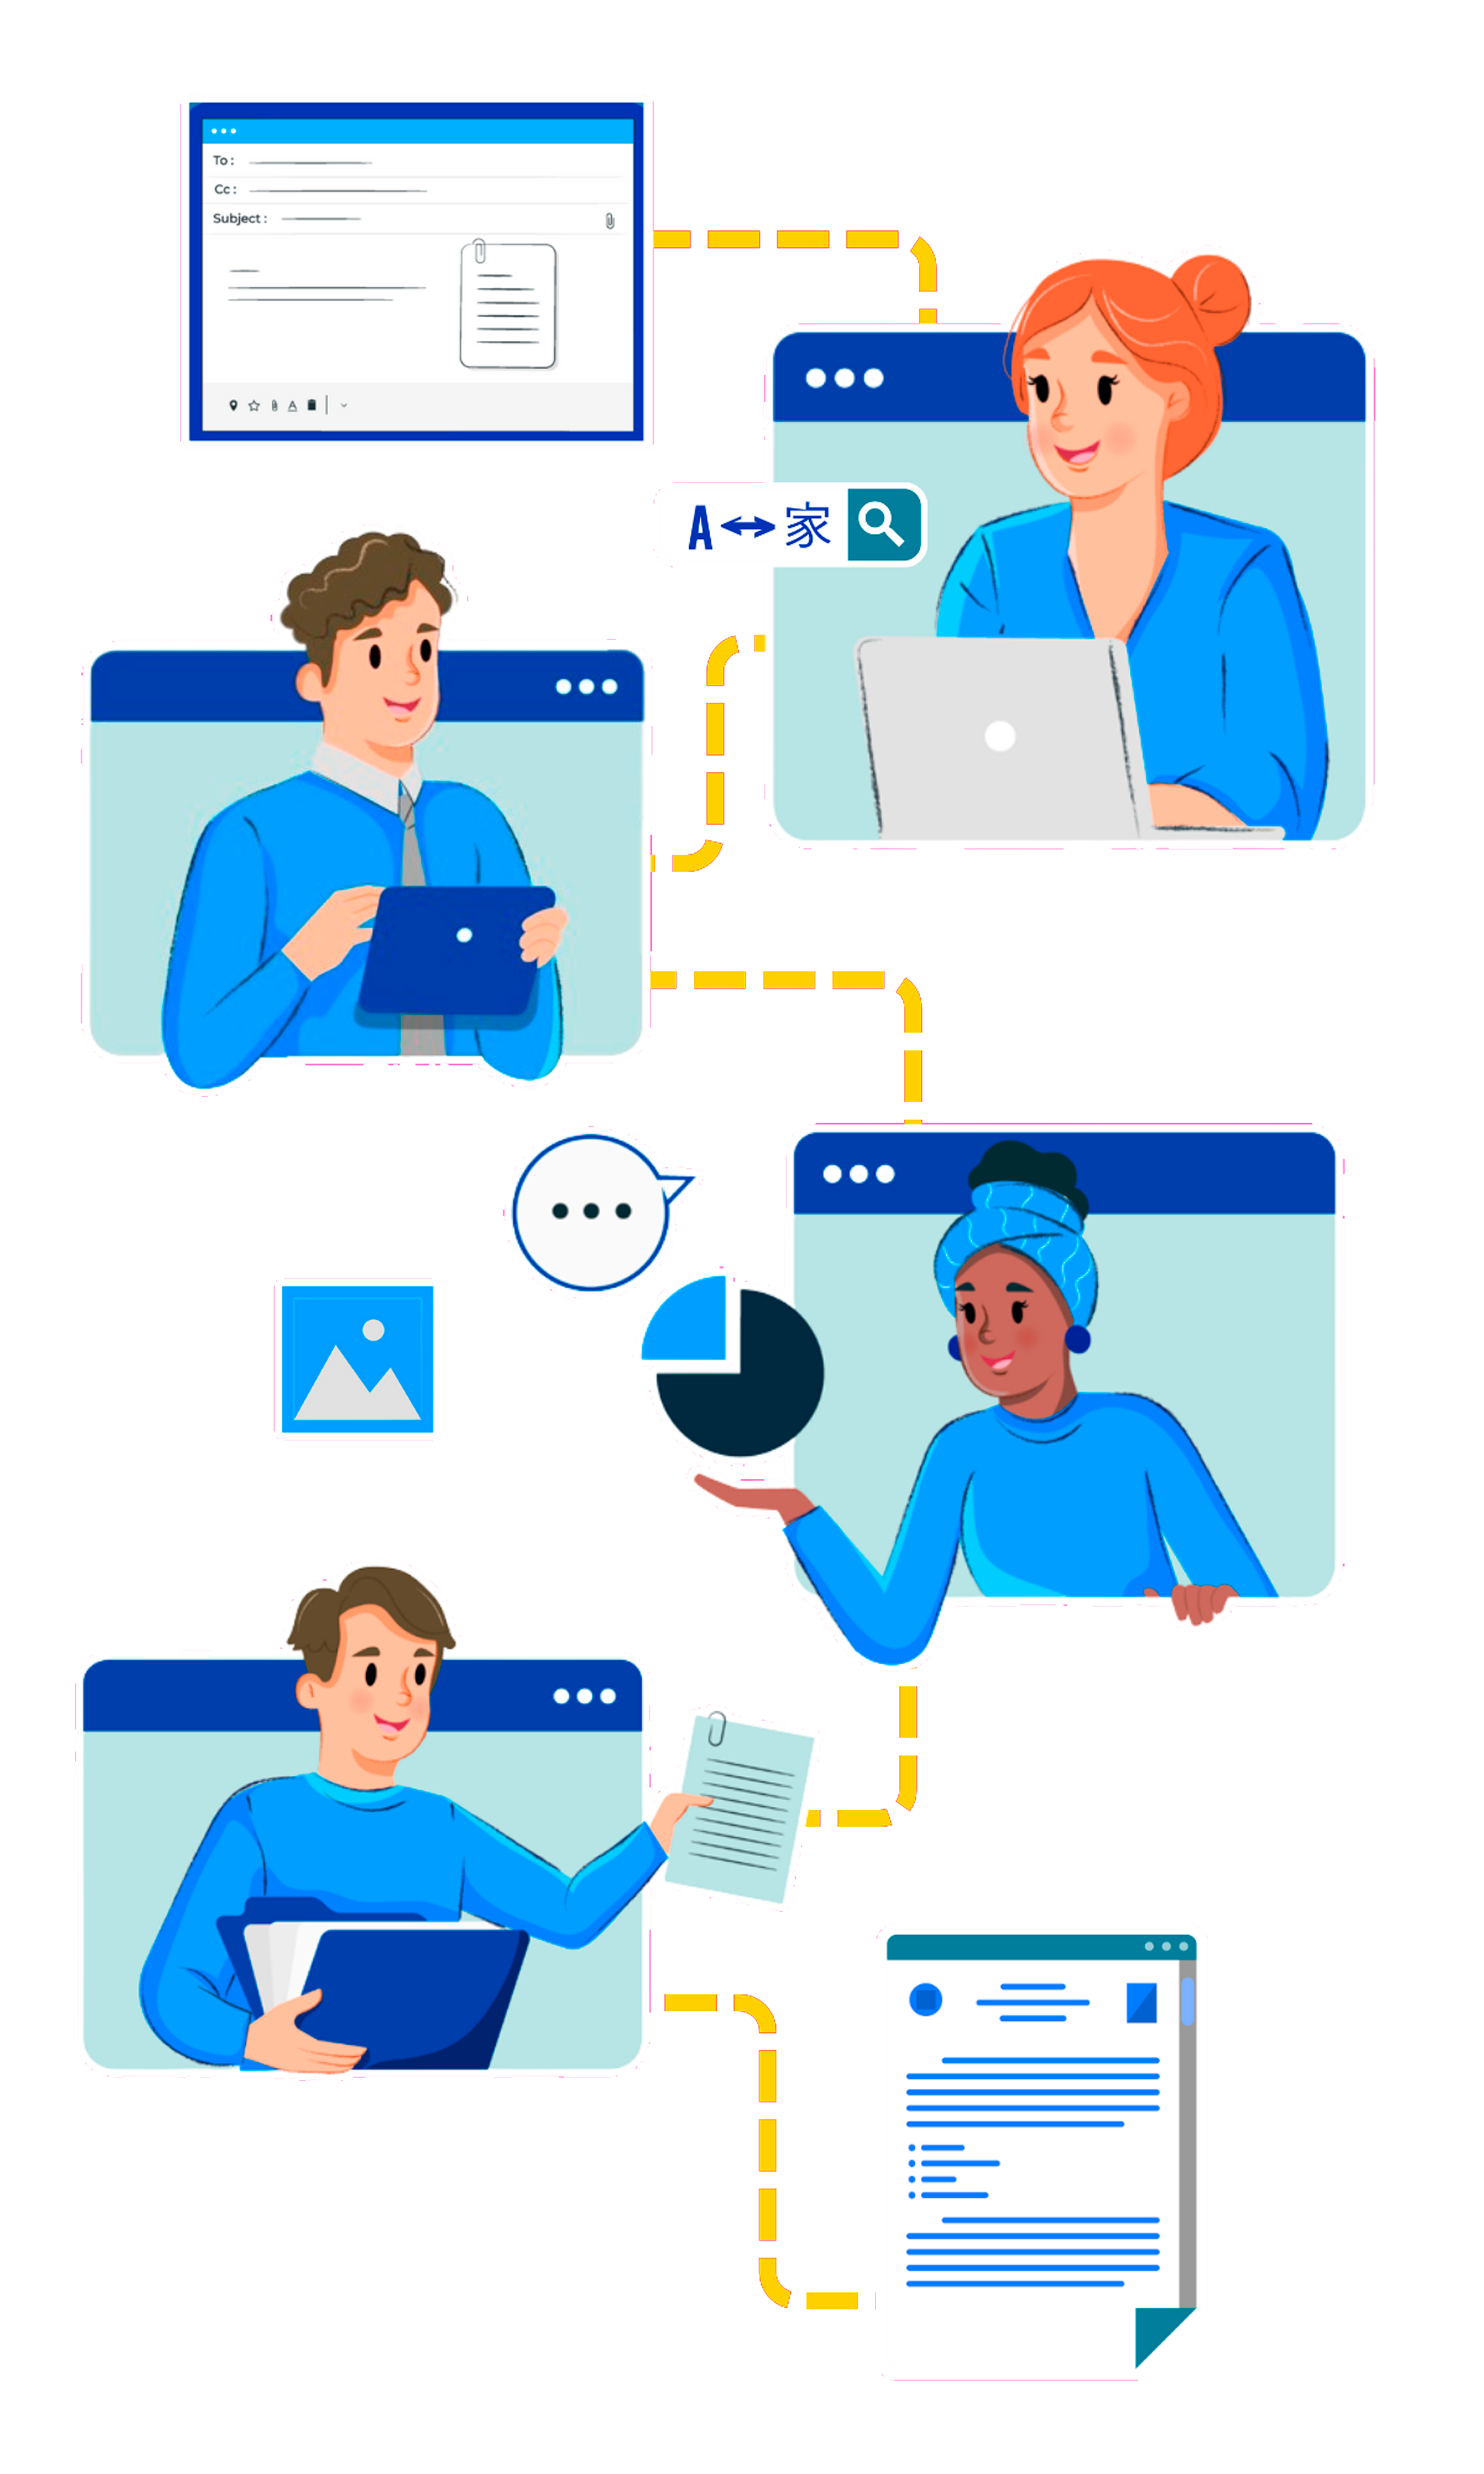 The Australis team is a representation of the translation process for a project. It starts with an email with a request; then a team member coordinates the project, passes it to a translator, and from there it goes to the design and editing area until the project is finalized.